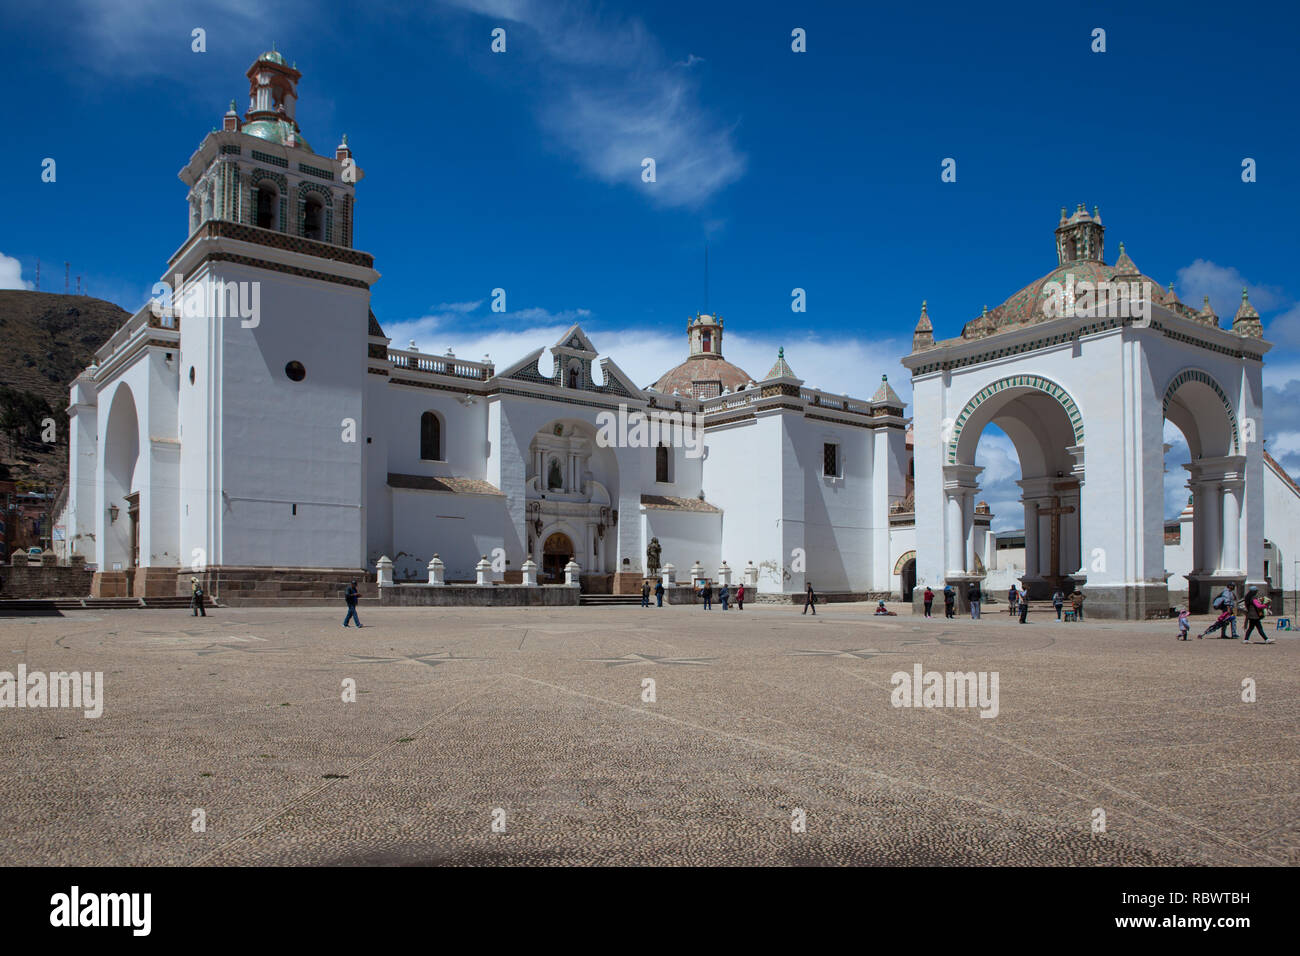 The moorish style Basilica of Our Lady of Copacabana was built in the 16th century and is decorated with domes and traditional azulejo tiles. Stock Photo